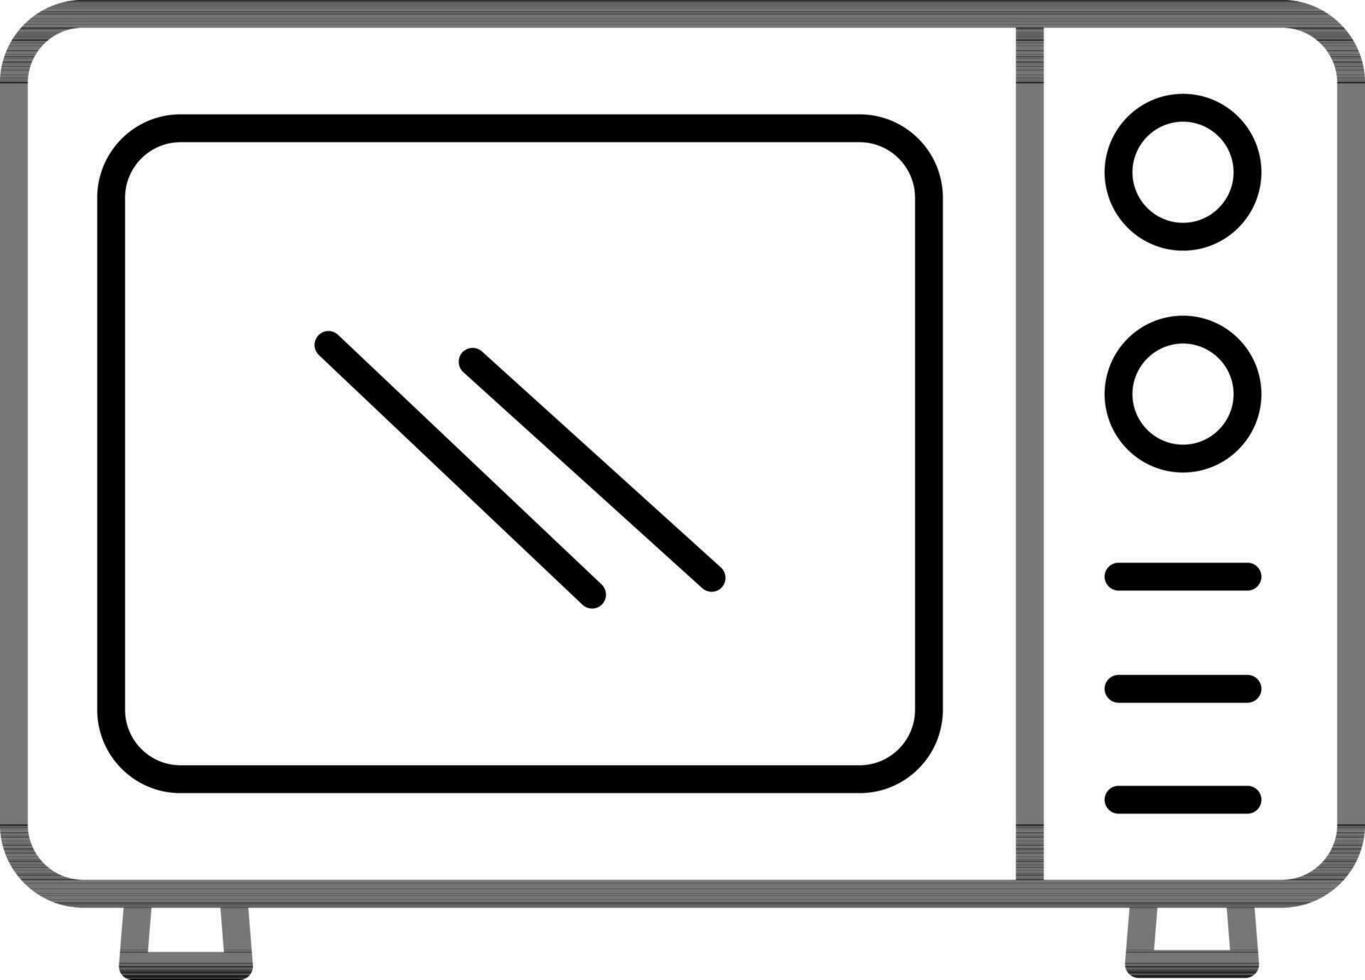 Microwave Icon or Symbol in Black Line Art. vector